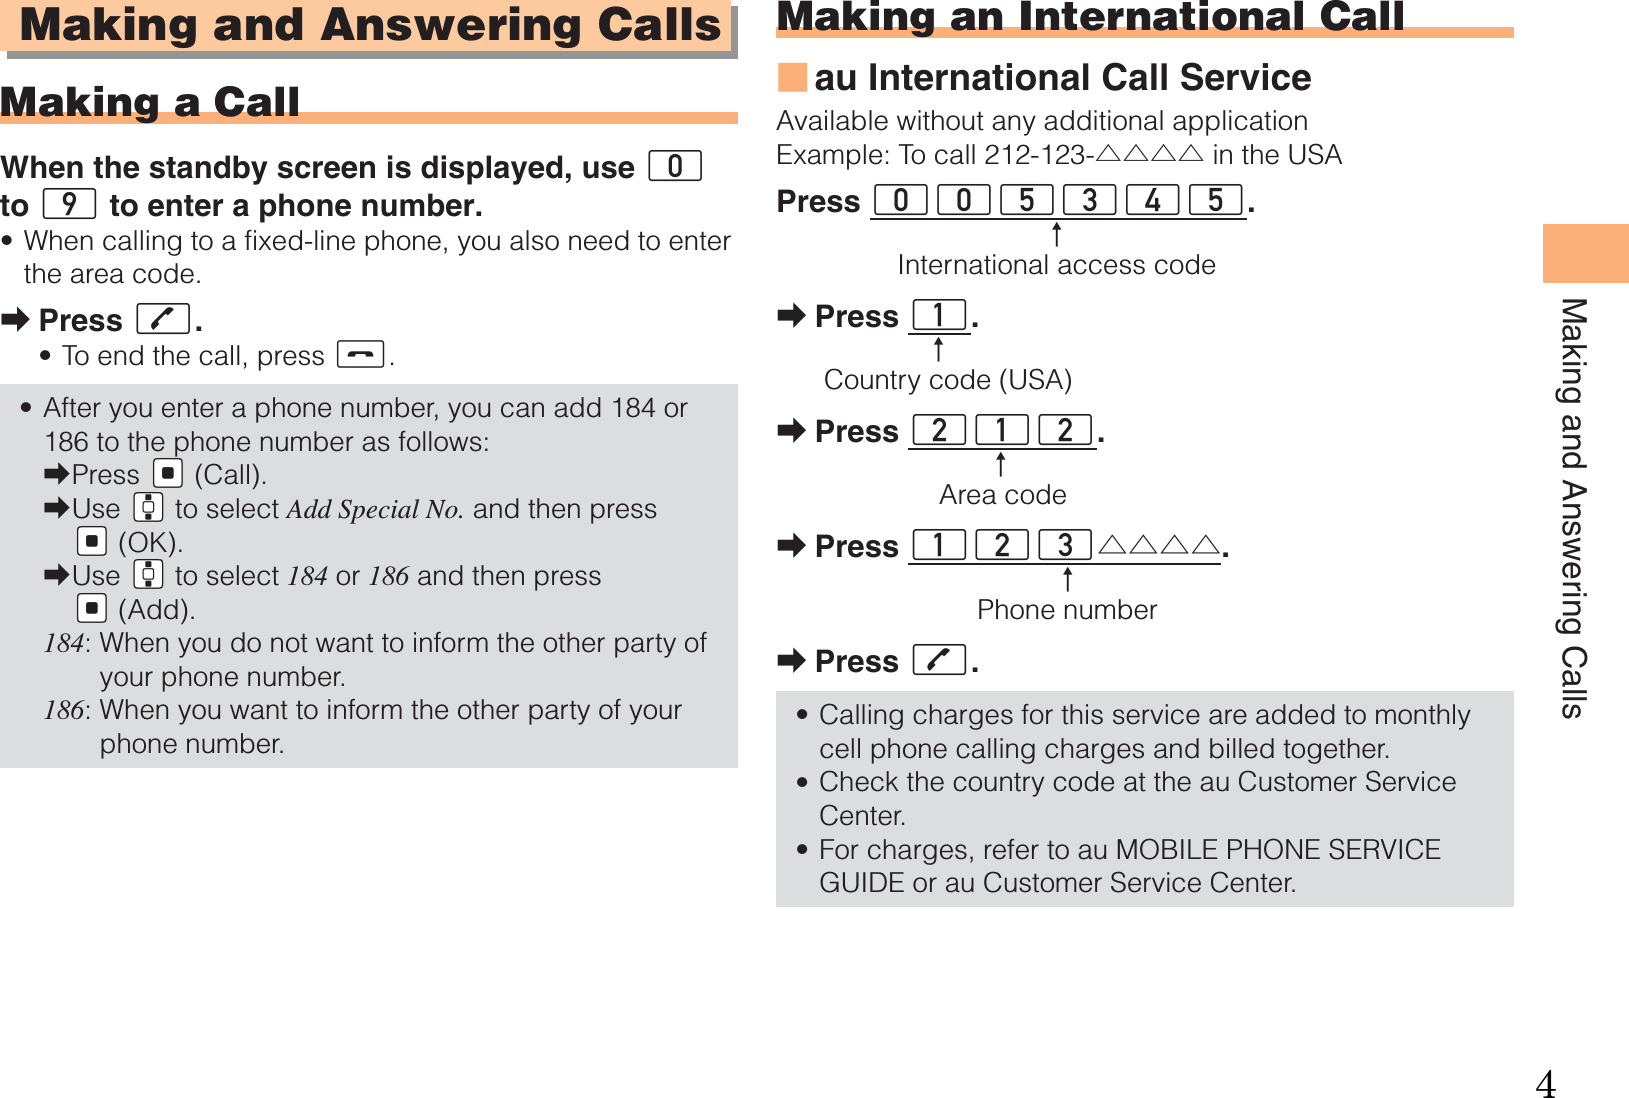 15Making and Answering CallsMaking and Answering CallsMaking a CallWhen the standby screen is displayed, use 0 to 9 to enter a phone number.When calling to a fixed-line phone, you also need to enter the area code.Press Q.To end the call, press S.After you enter a phone number, you can add 184 or 186 to the phone number as follows:Press {[ (Call).Use gG to select Add Special No. and then press {[ (OK).Use gG to select 184 or 186 and then press {[ (Add).184:  When you do not want to inform the other party of your phone number.186:  When you want to inform the other party of your phone number.•➡••➡➡➡Making an International Callau International Call ServiceAvailable without any additional applicationExample: To call 212-123-△△△△ in the USAPress 005345. ↑    International access codePress 1.↑Country code (USA)Press 212.↑Area codePress 123△△△△.↑Phone numberPress Q.Calling charges for this service are added to monthly cell phone calling charges and billed together.Check the country code at the au Customer Service Center.For charges, refer to au MOBILE PHONE SERVICE GUIDE or au Customer Service Center.■➡➡➡➡•••4